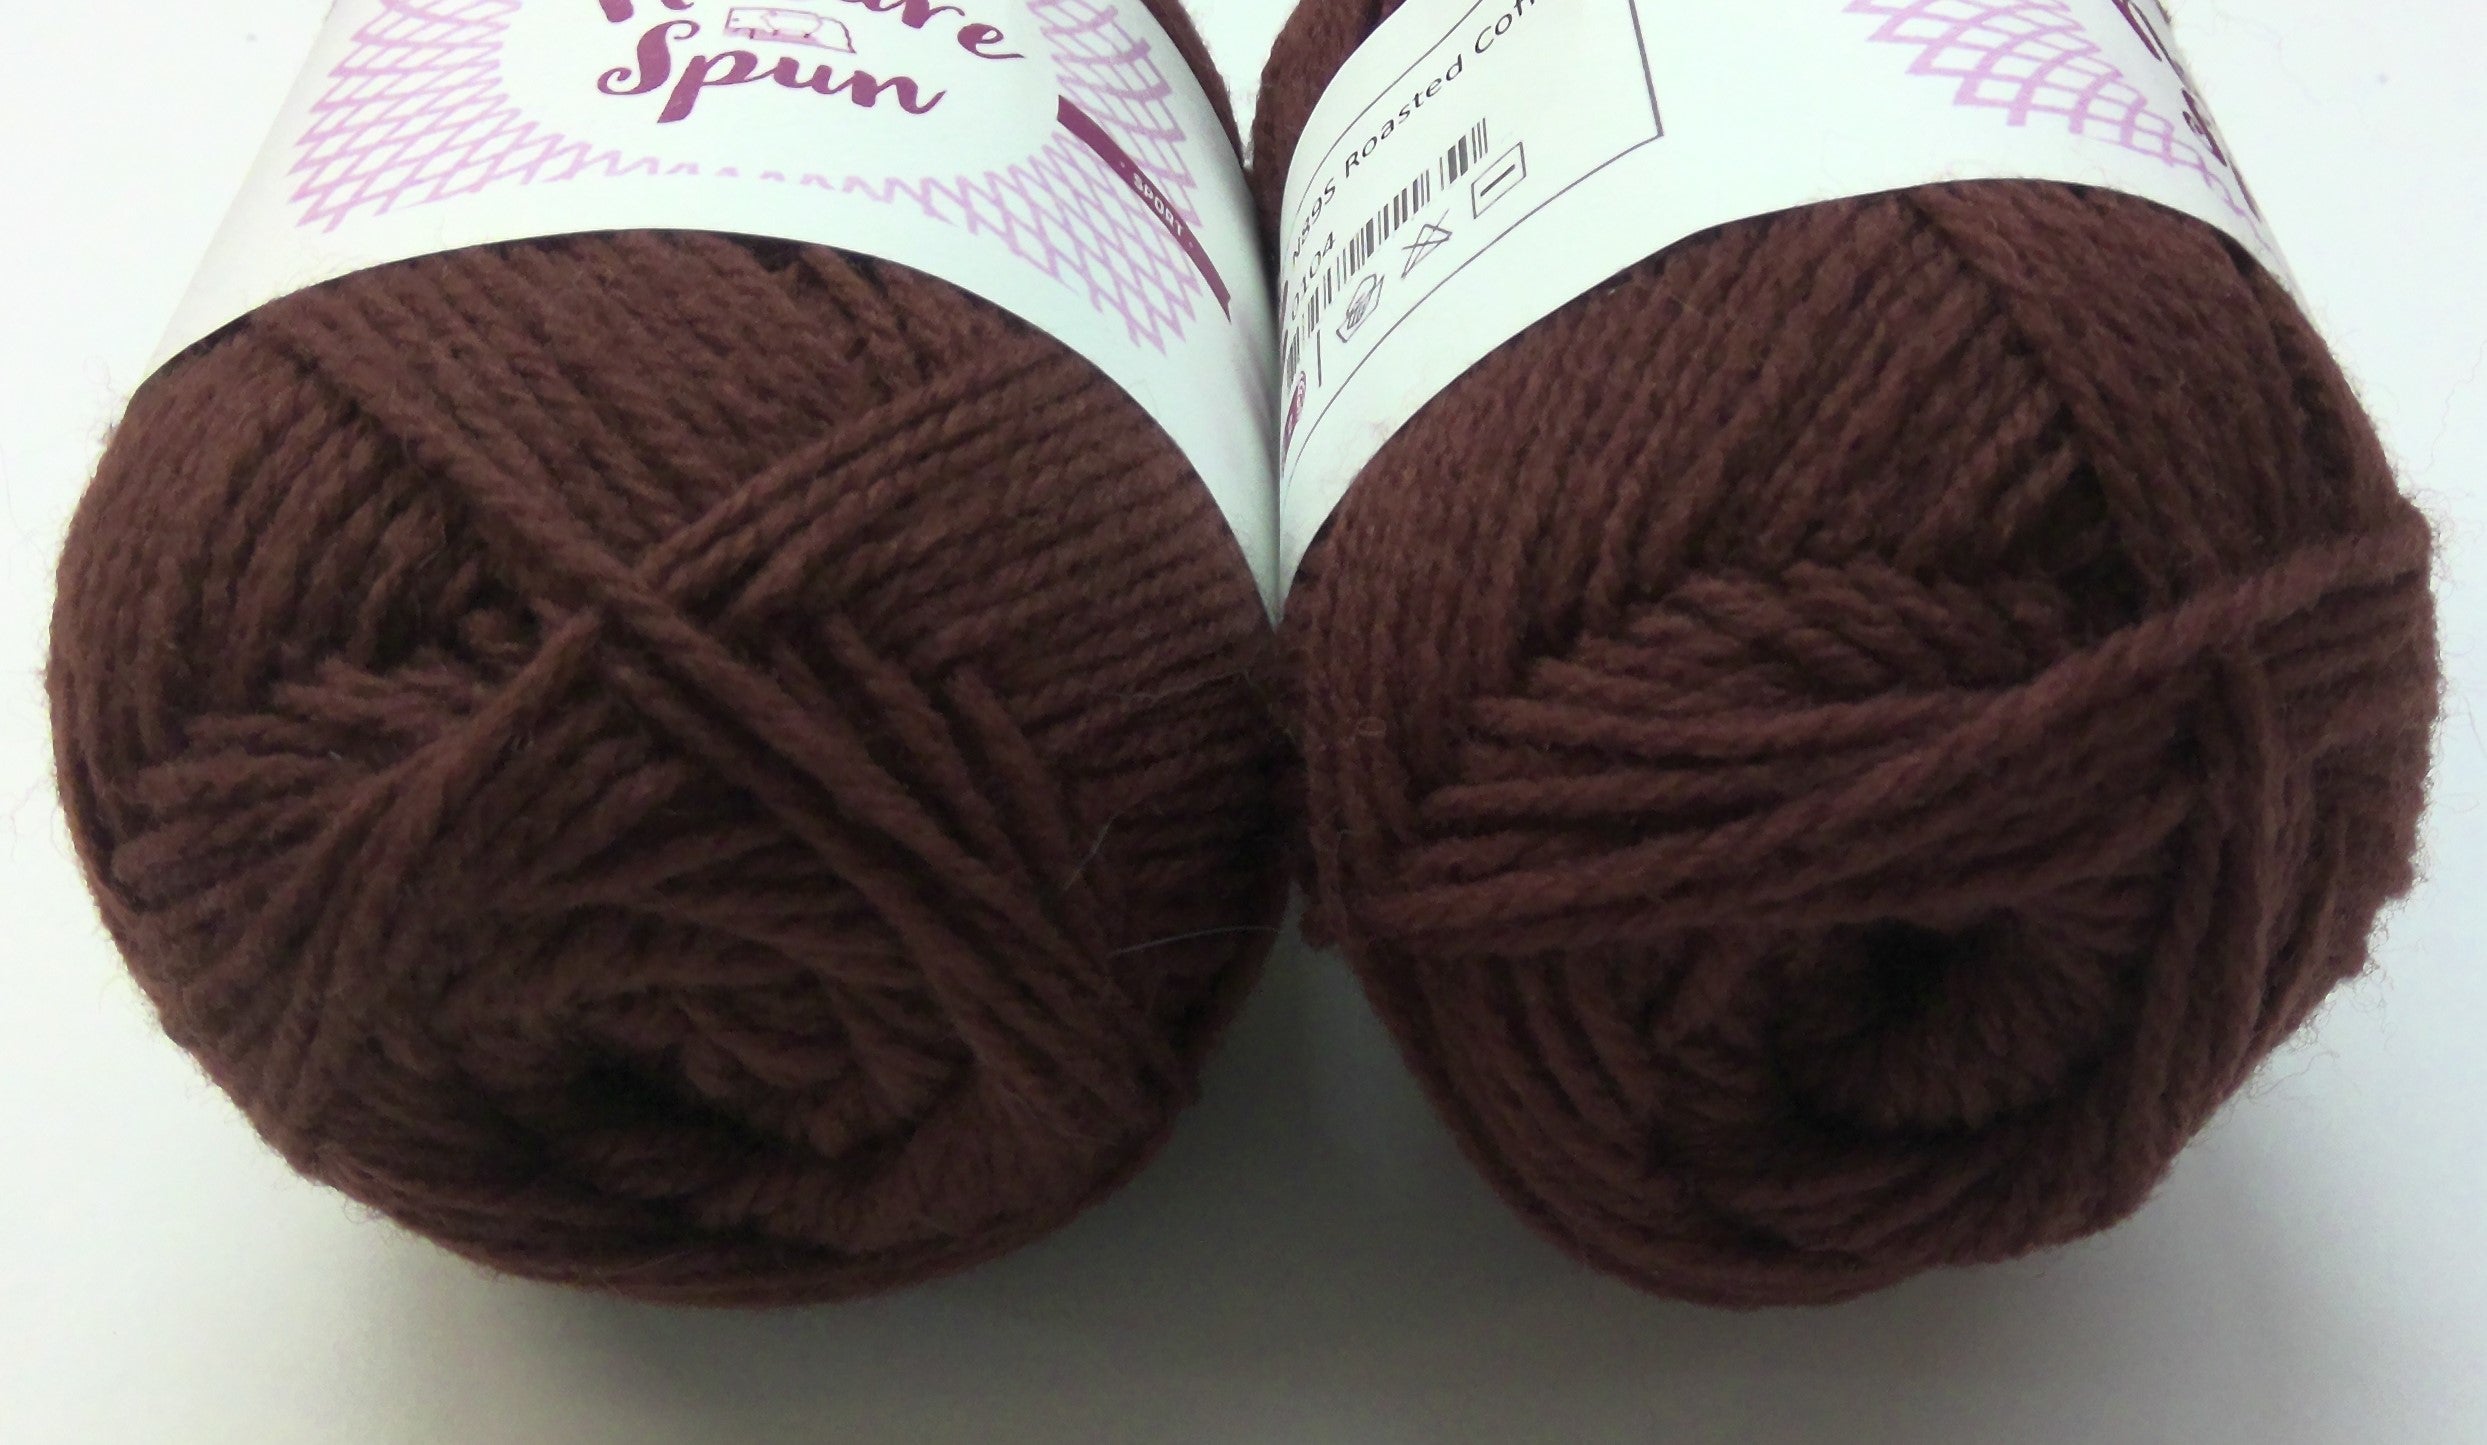 Nature Spun Sport Weight Yarn Brown Sheep Company - Solids – The